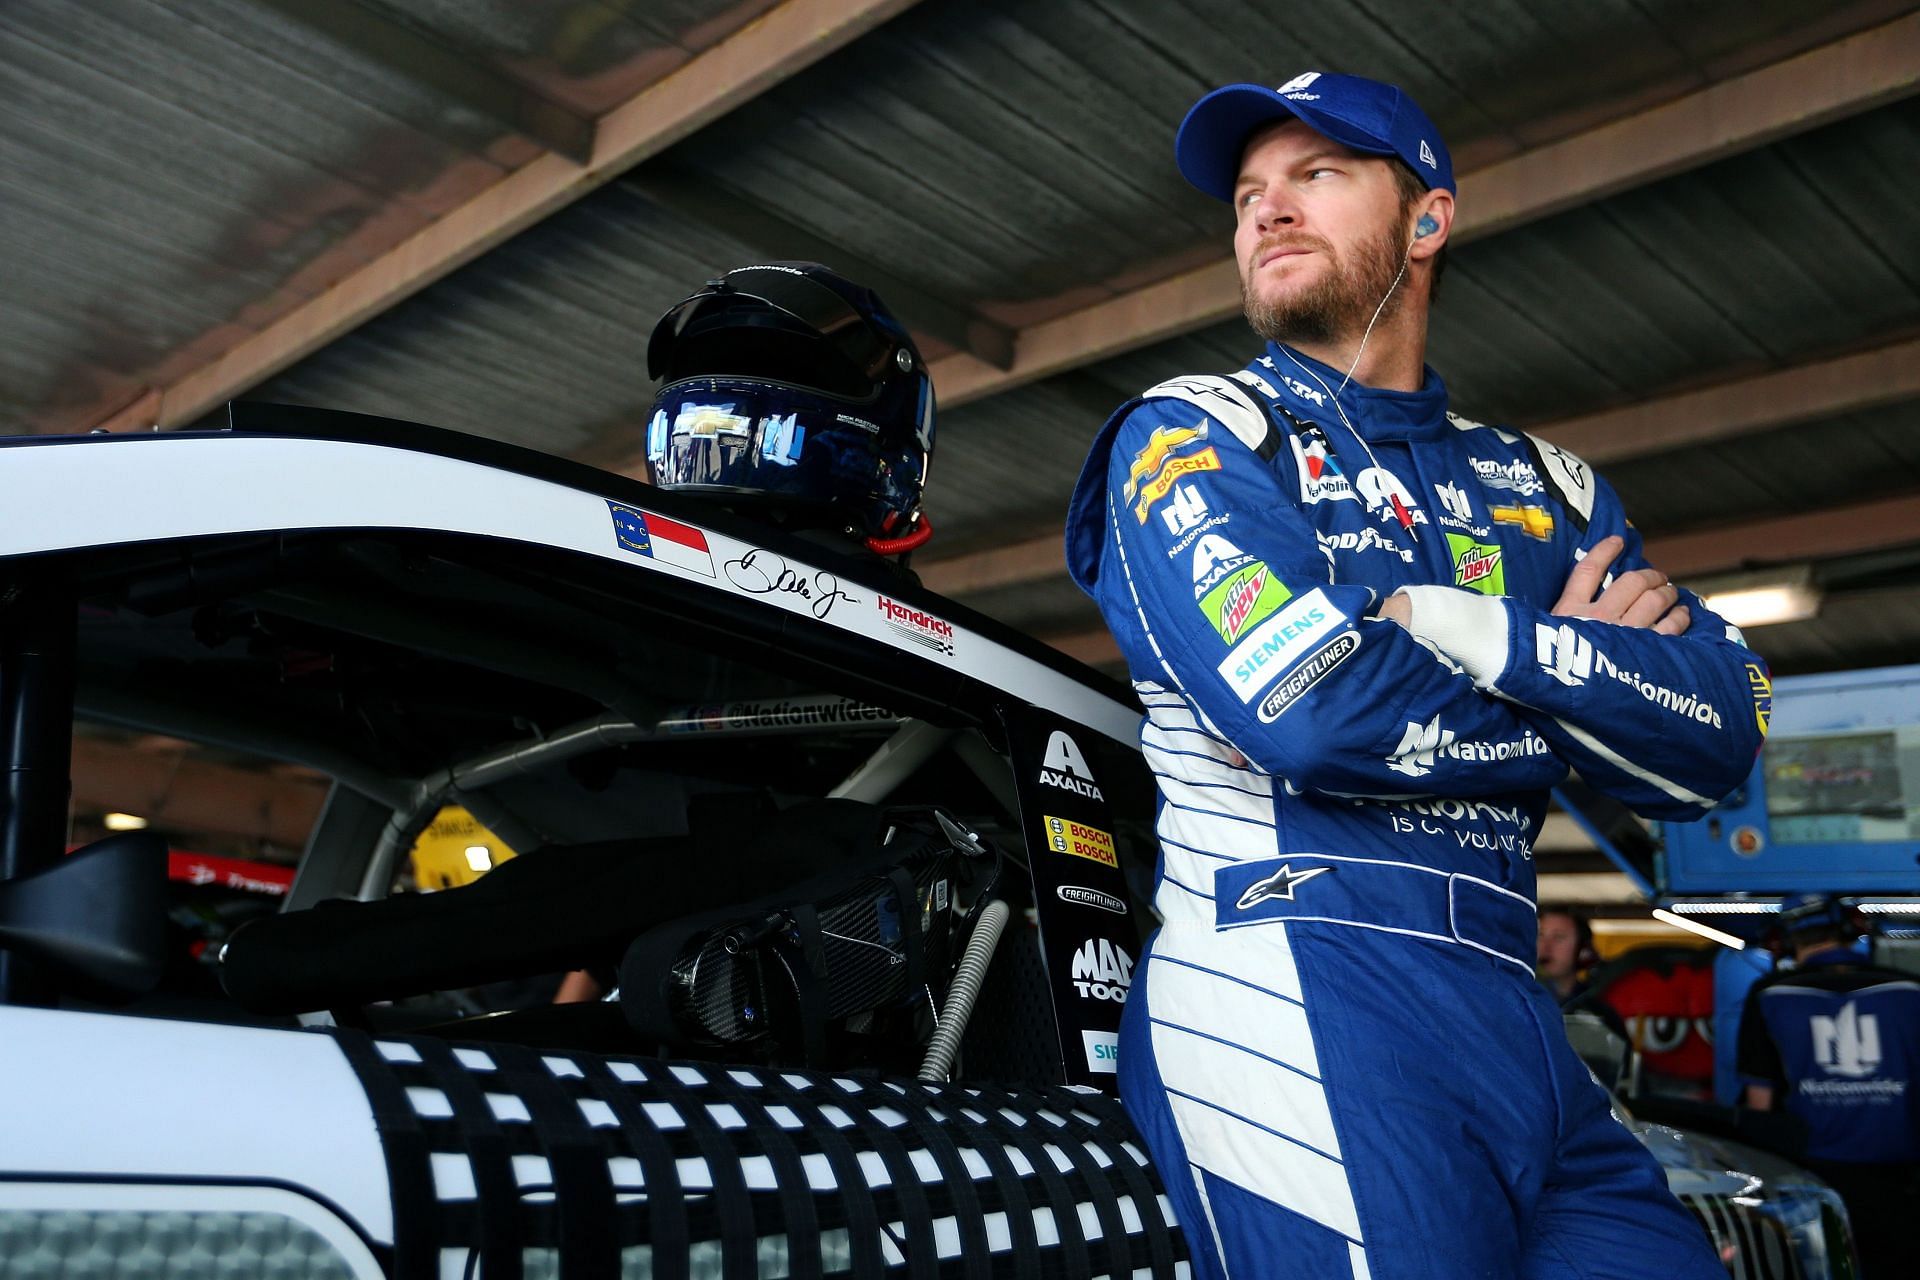 Dale Earnhardt Jr. stands in the garage area during practice for the 2017 Monster Energy NASCAR Cup Series Apache Warrior 400 presented by Lucas Oil at Dover International Speedway in Dover, Delaware (Photo by Sean Gardner/Getty Images)